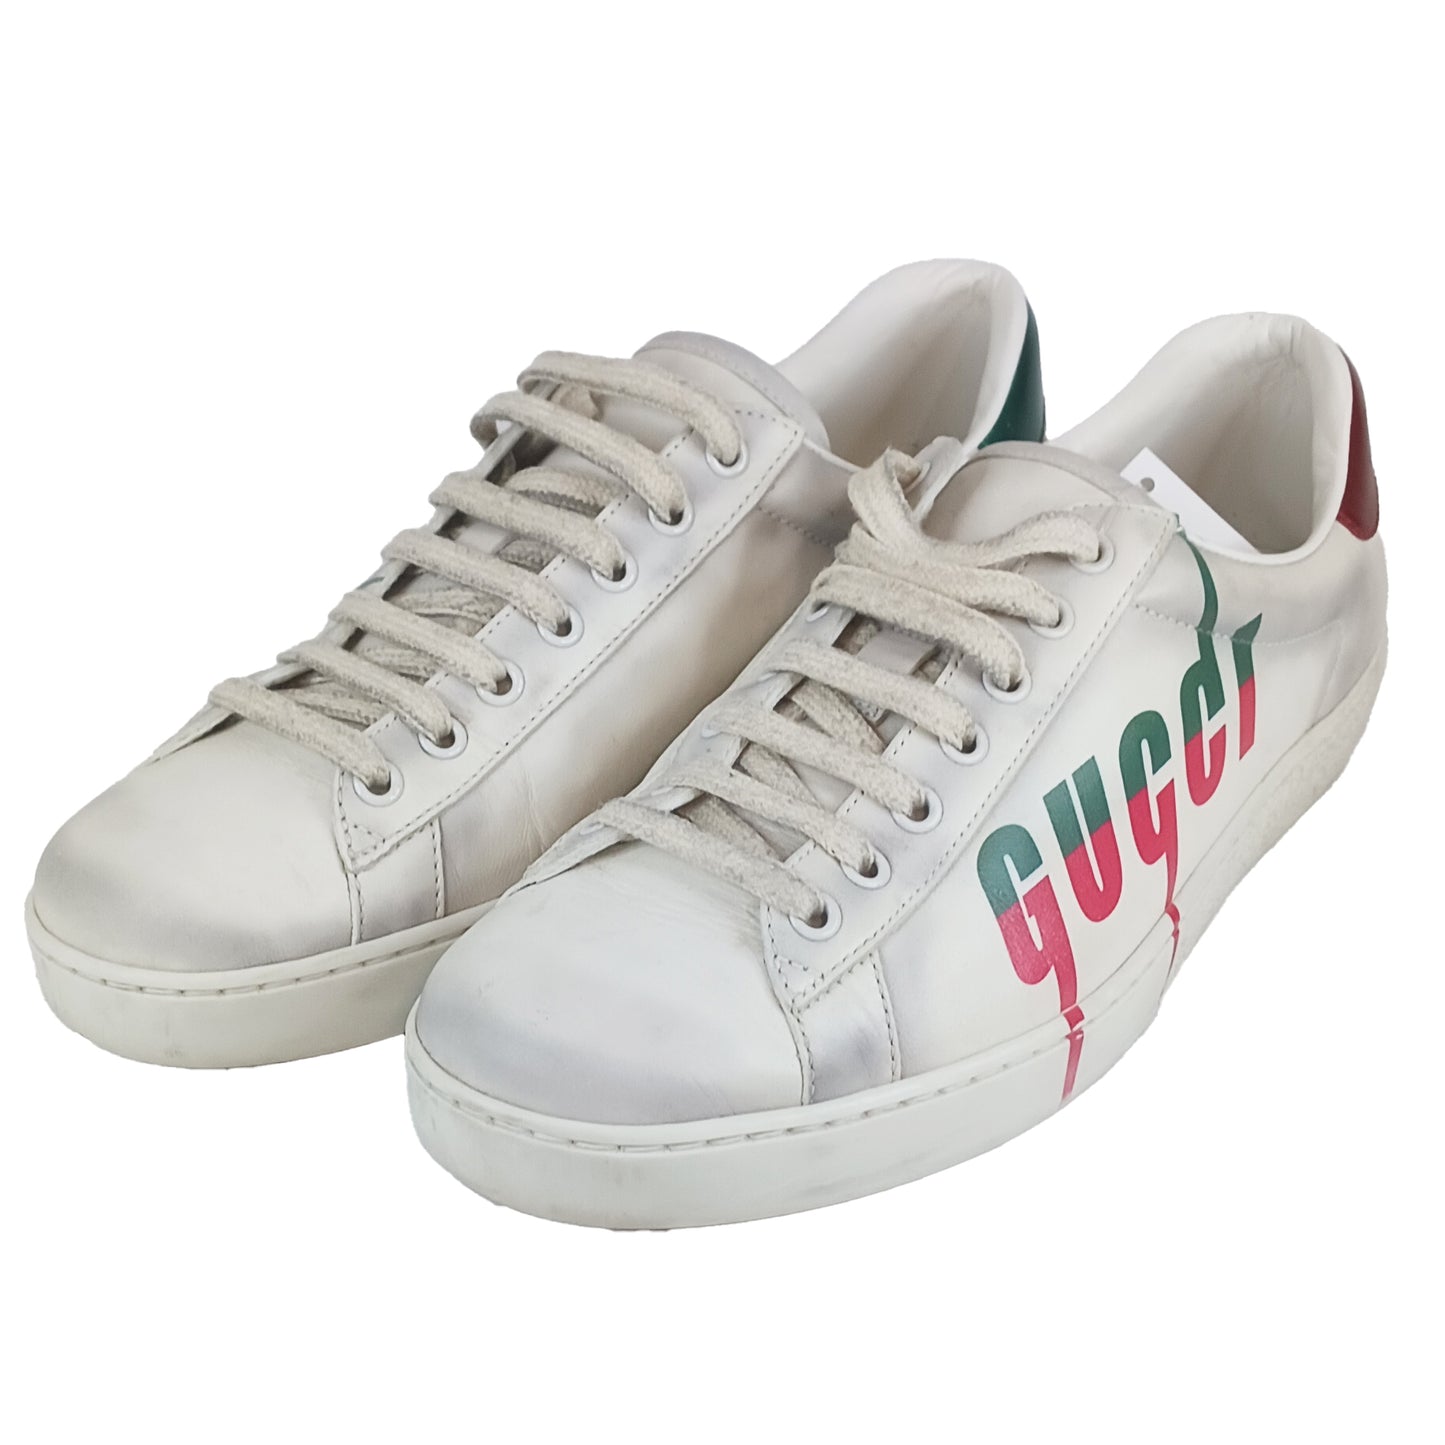 Gucci Ace Blade Distressed Sneaker